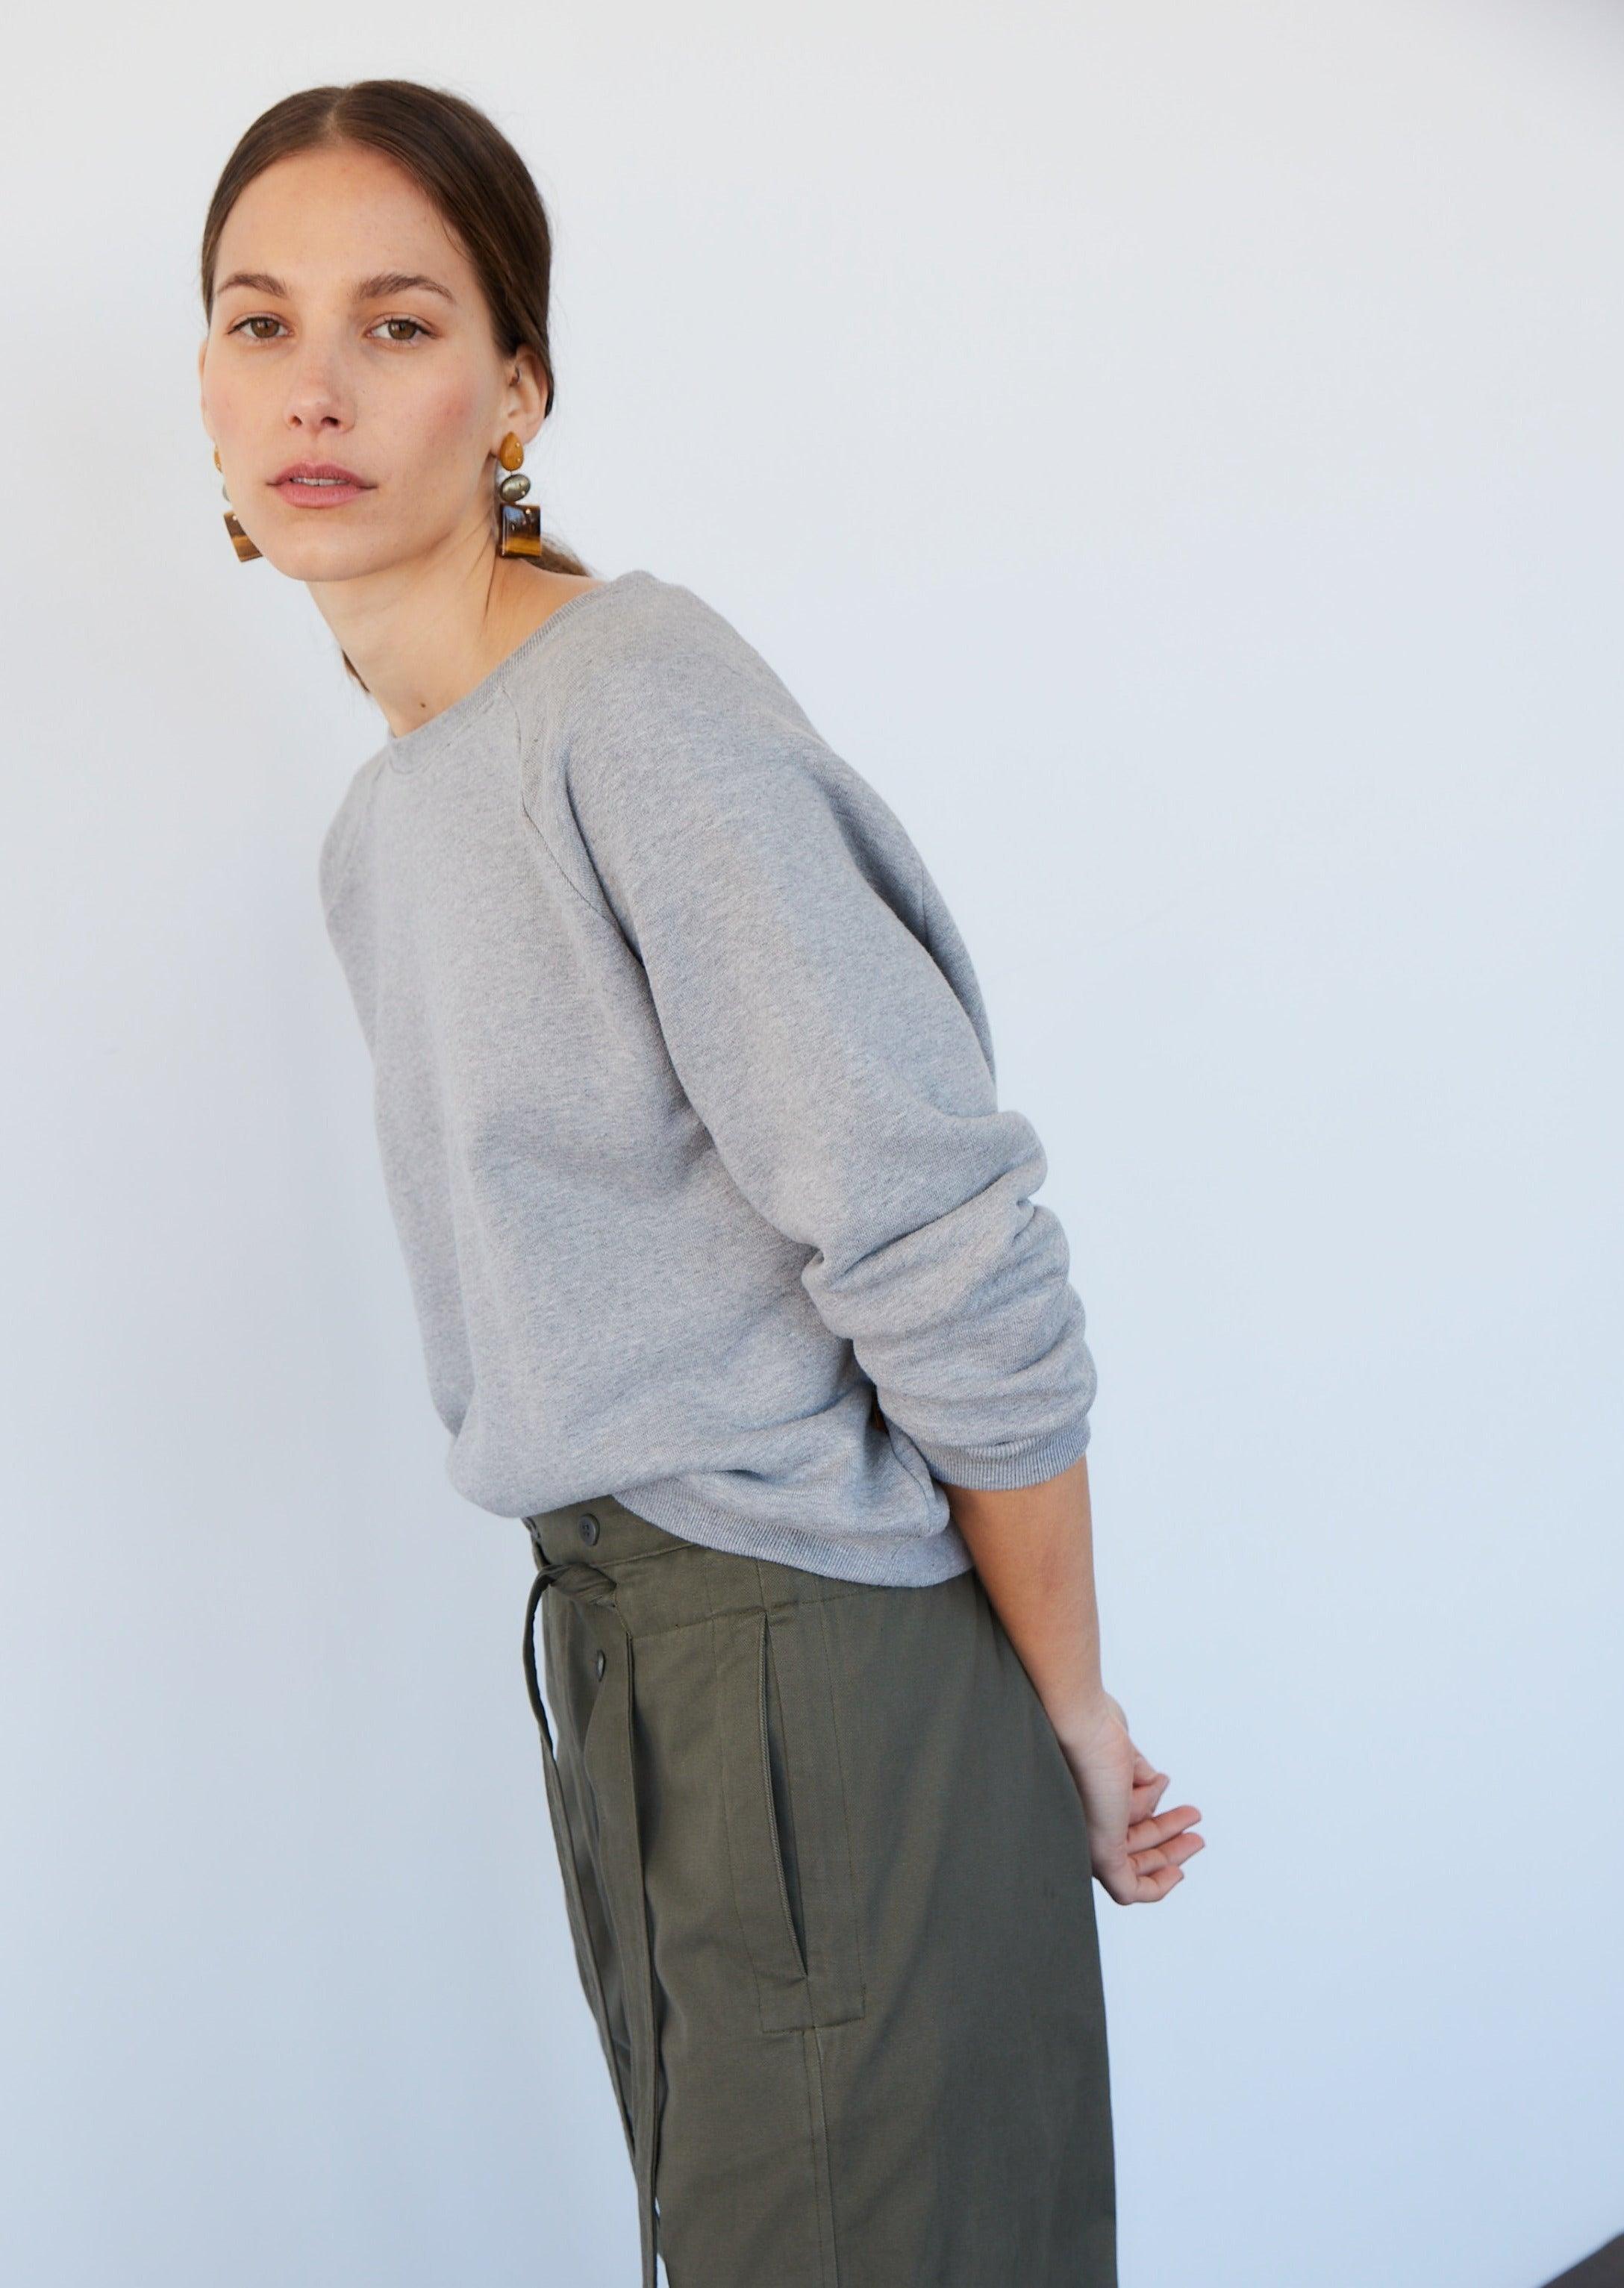 The Daily Sweatshirt in Heather Grey Side View